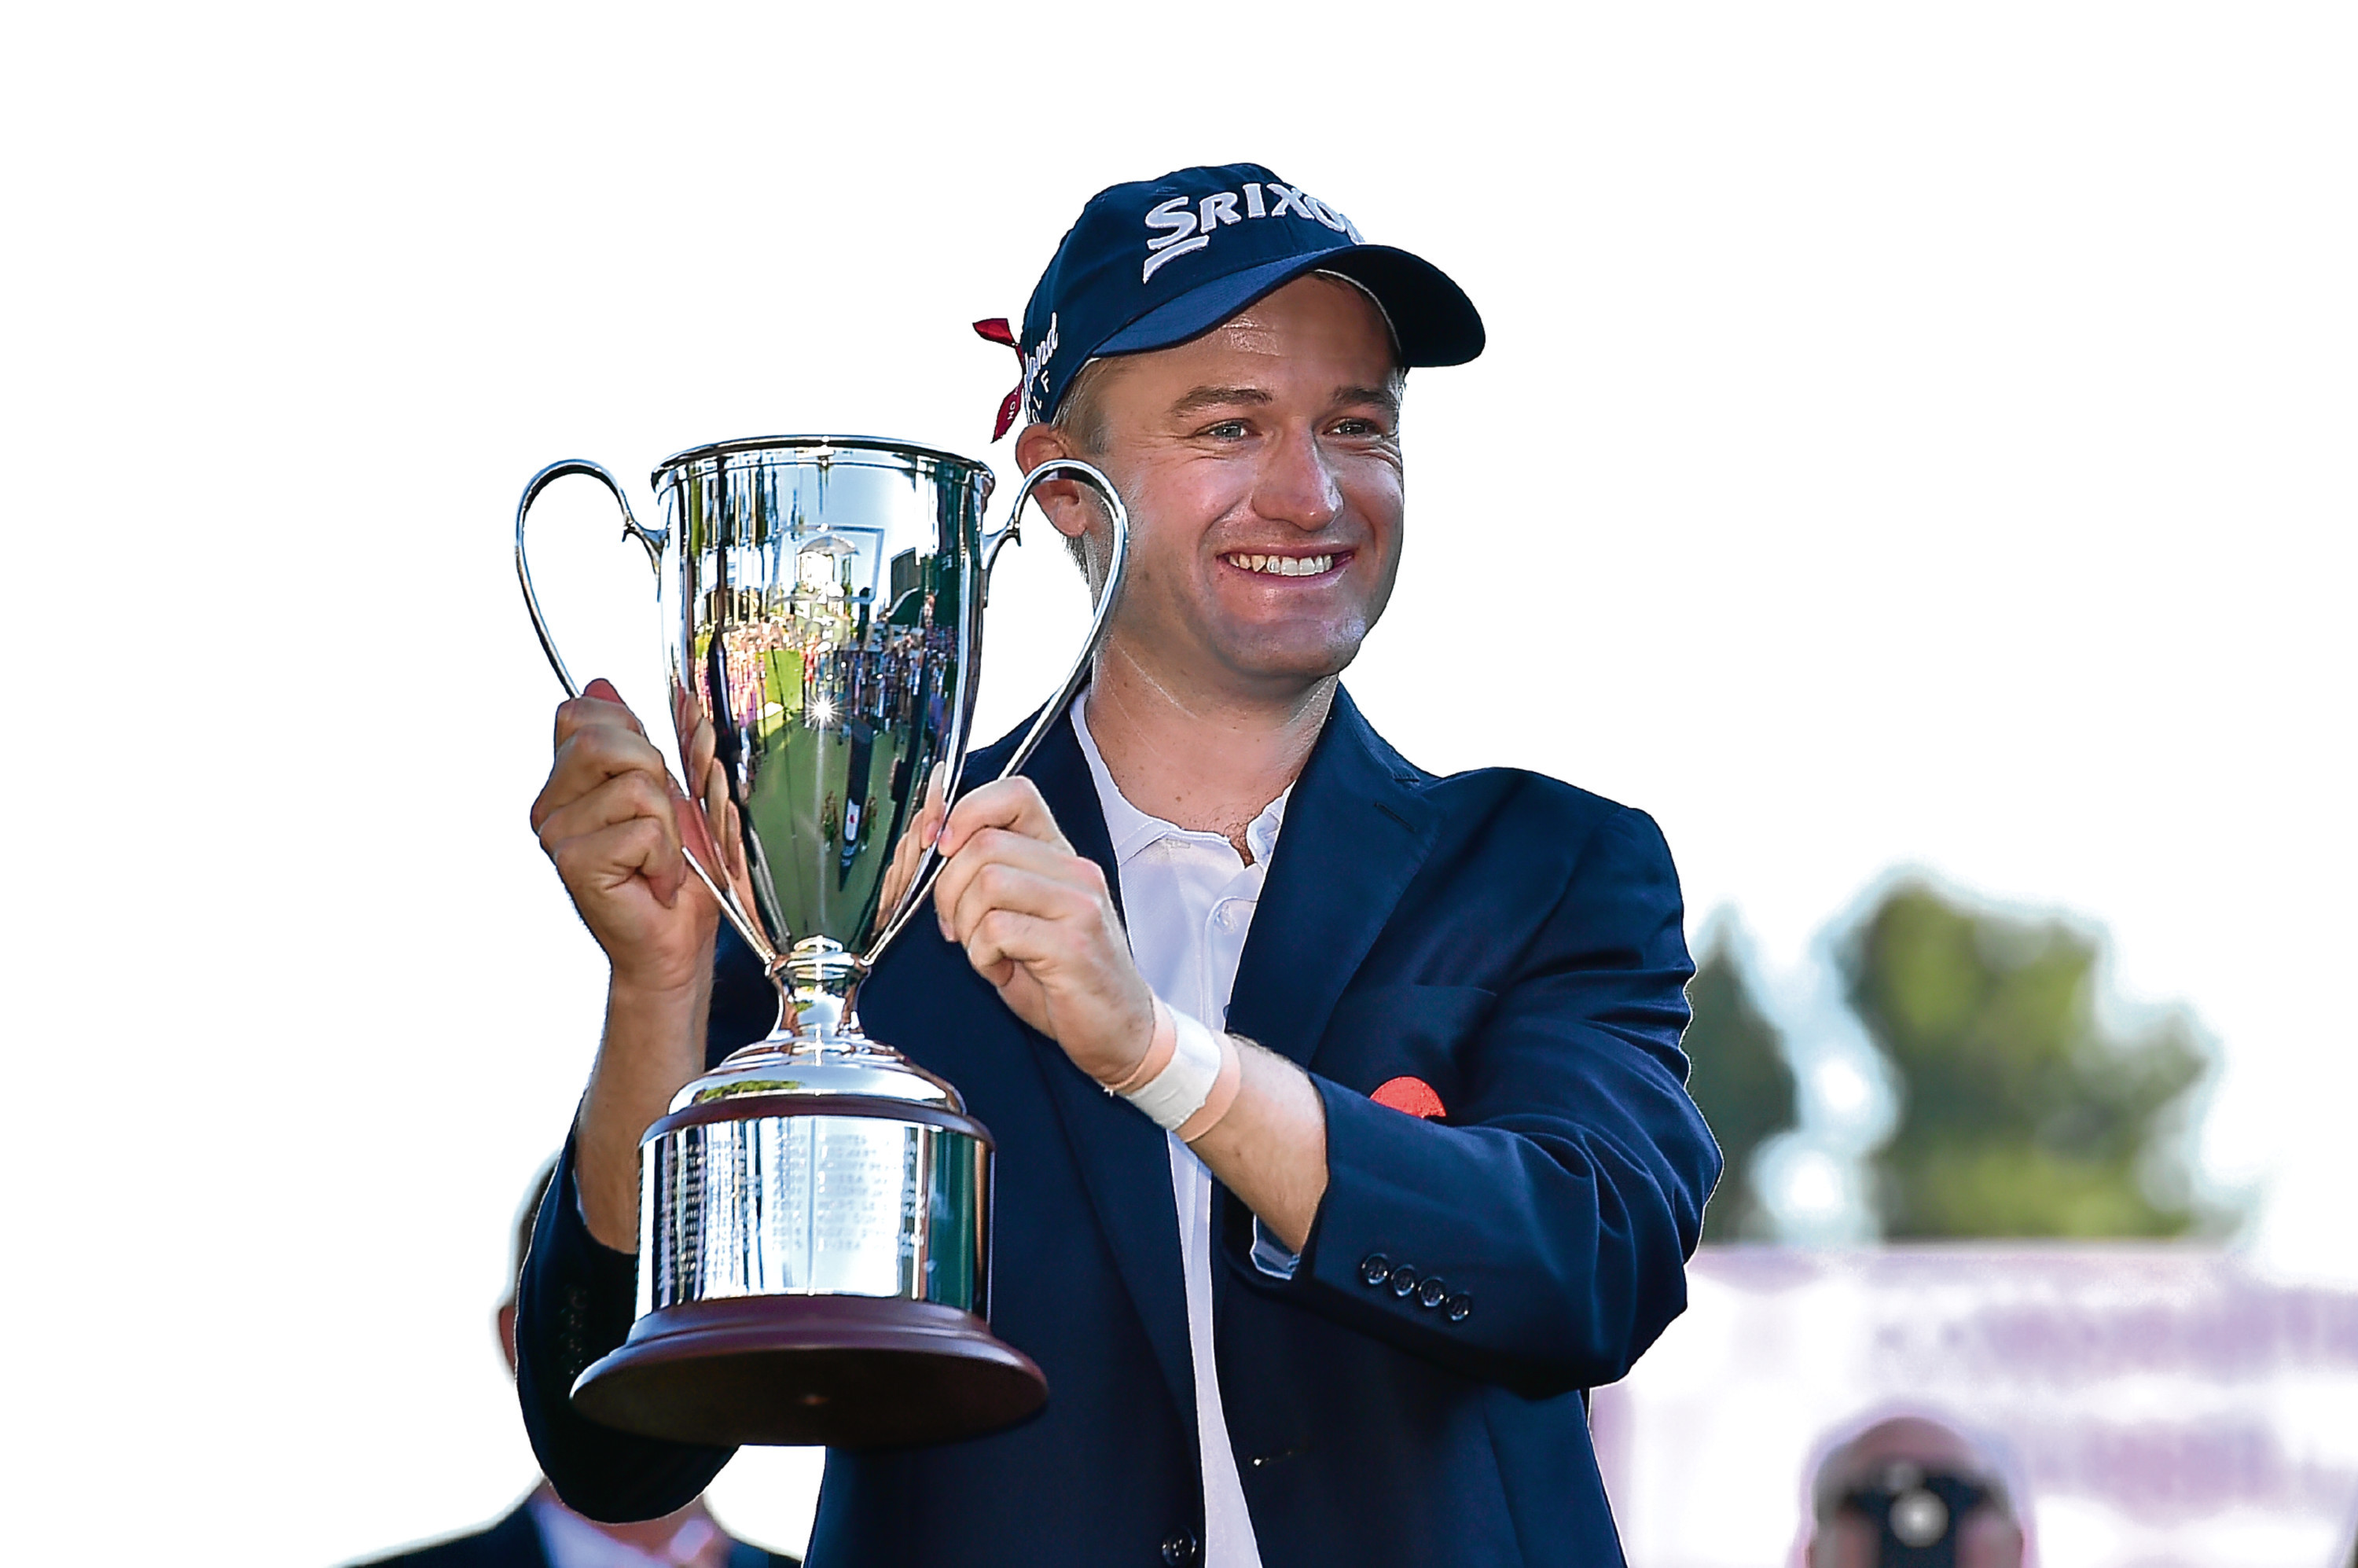 Russell Knox with the Travellers Championship trophy. The 30-year-old Scot now has a compelling argument to be a Ryder Cup wildcard.